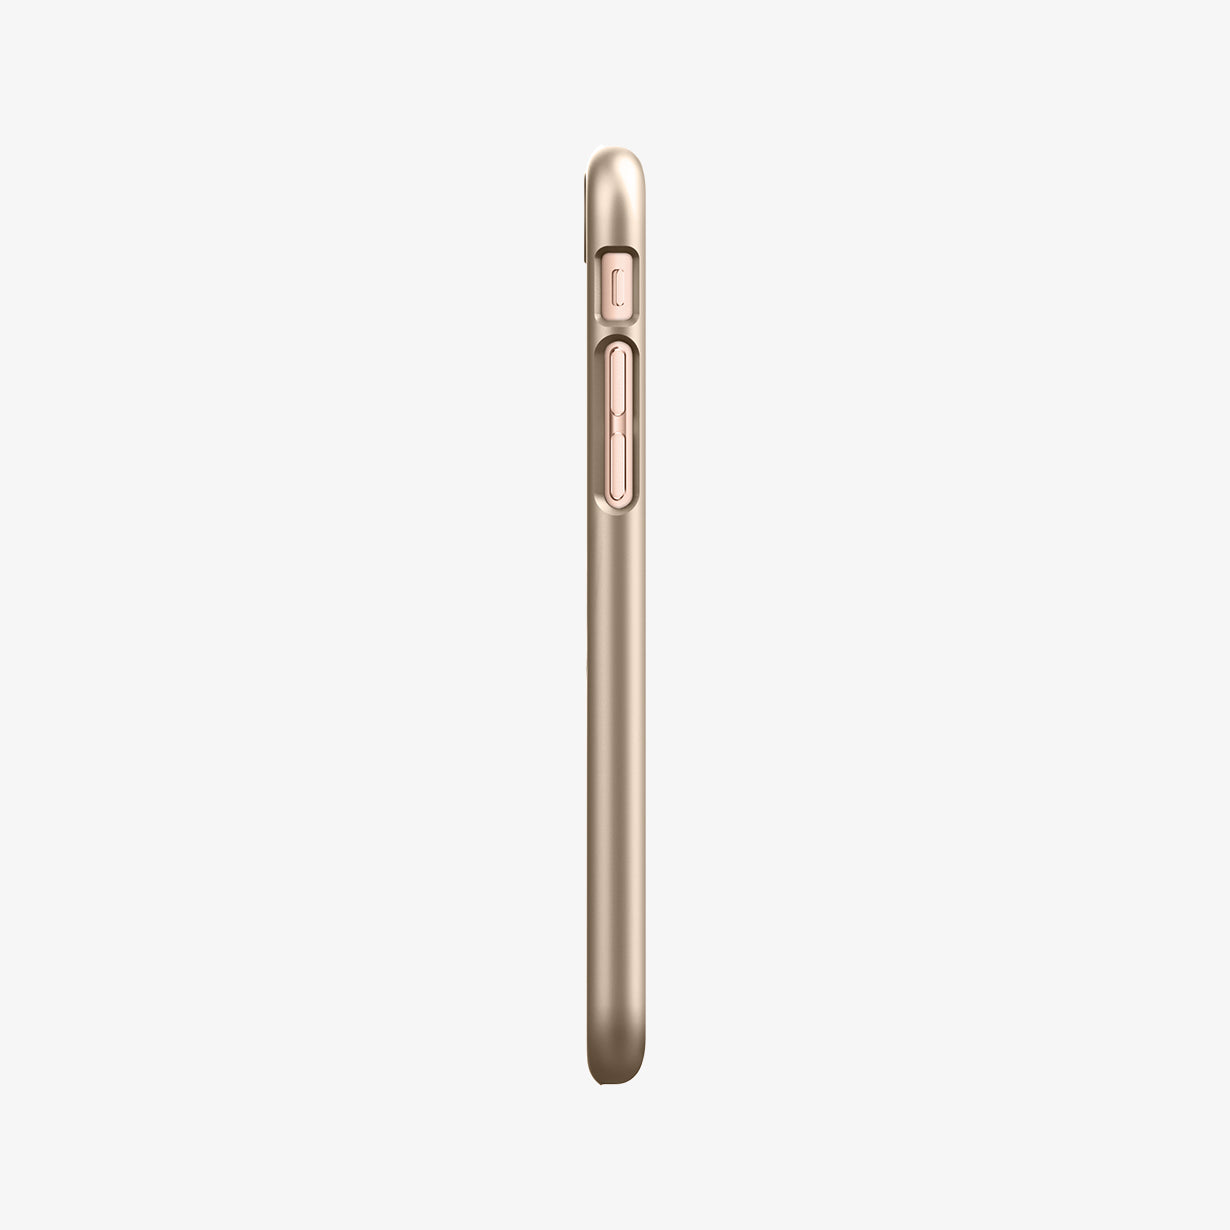 042CS20732 - iPhone SE Thin Fit case in rose gold showing the side